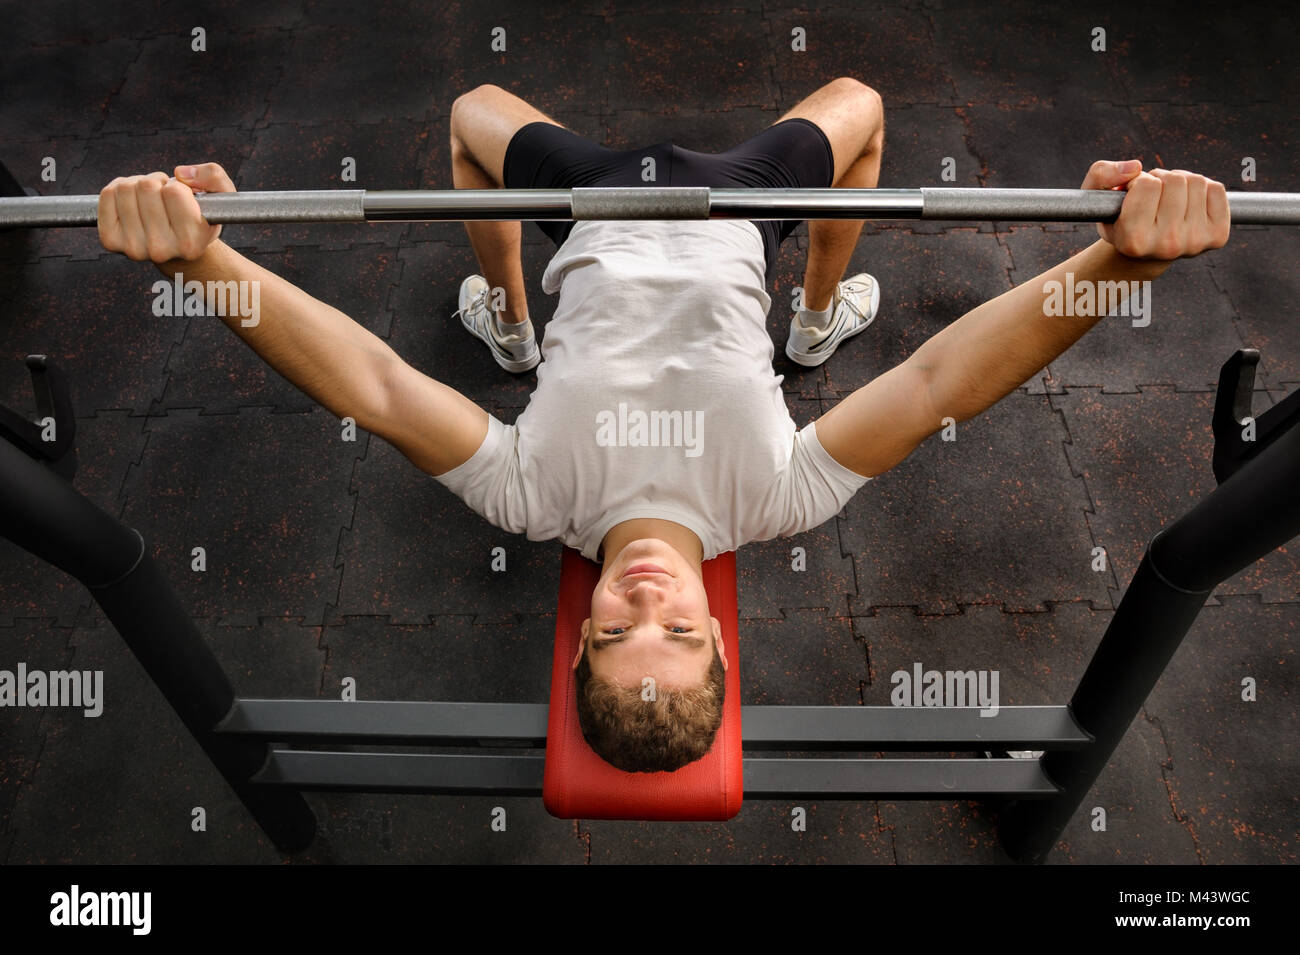 young man doing bench press workout in gym Stock Photo